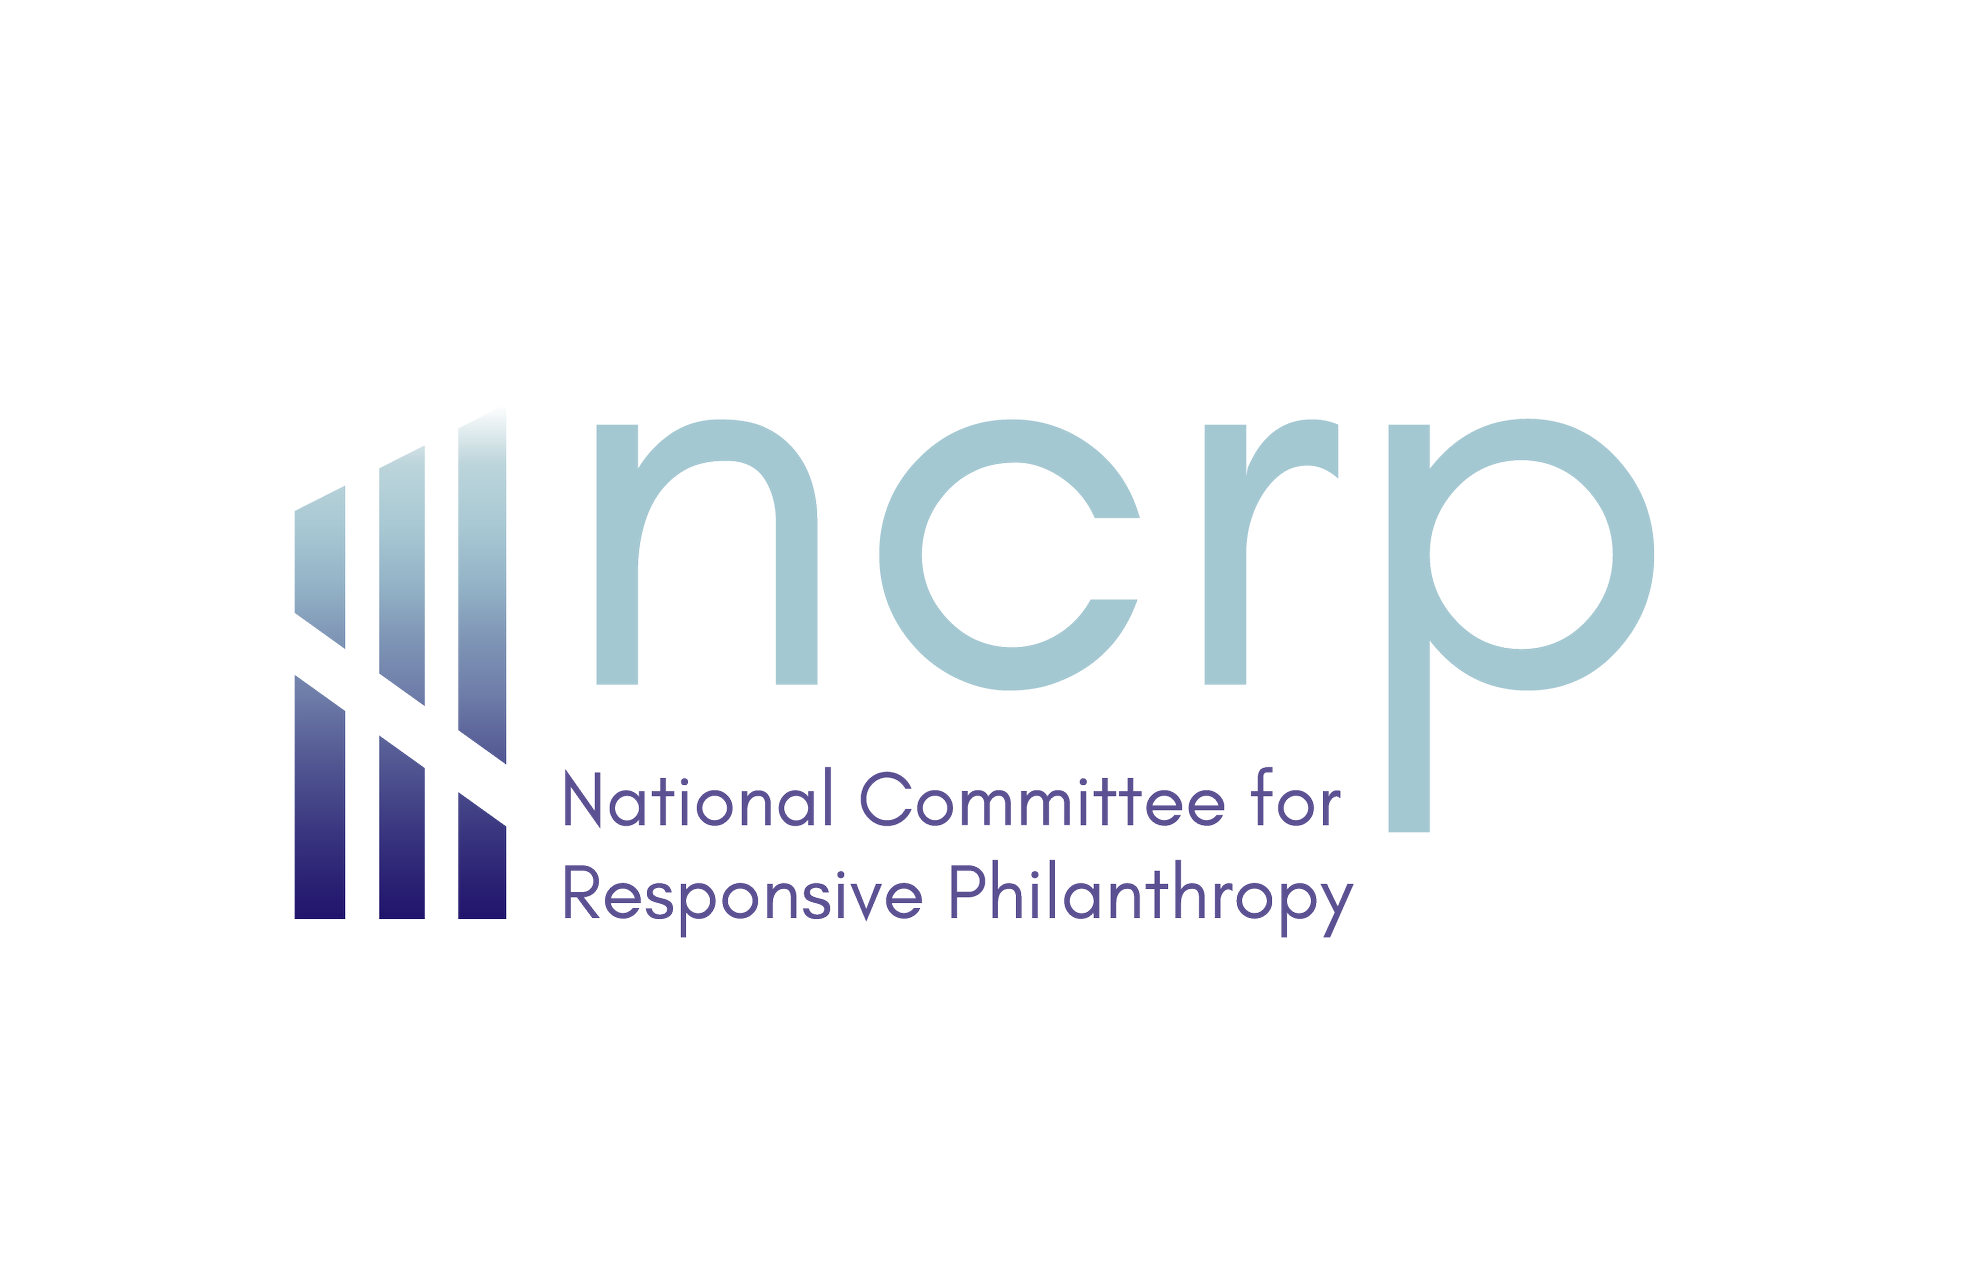 National Committee For Responsive Philanthropy (NCRP)